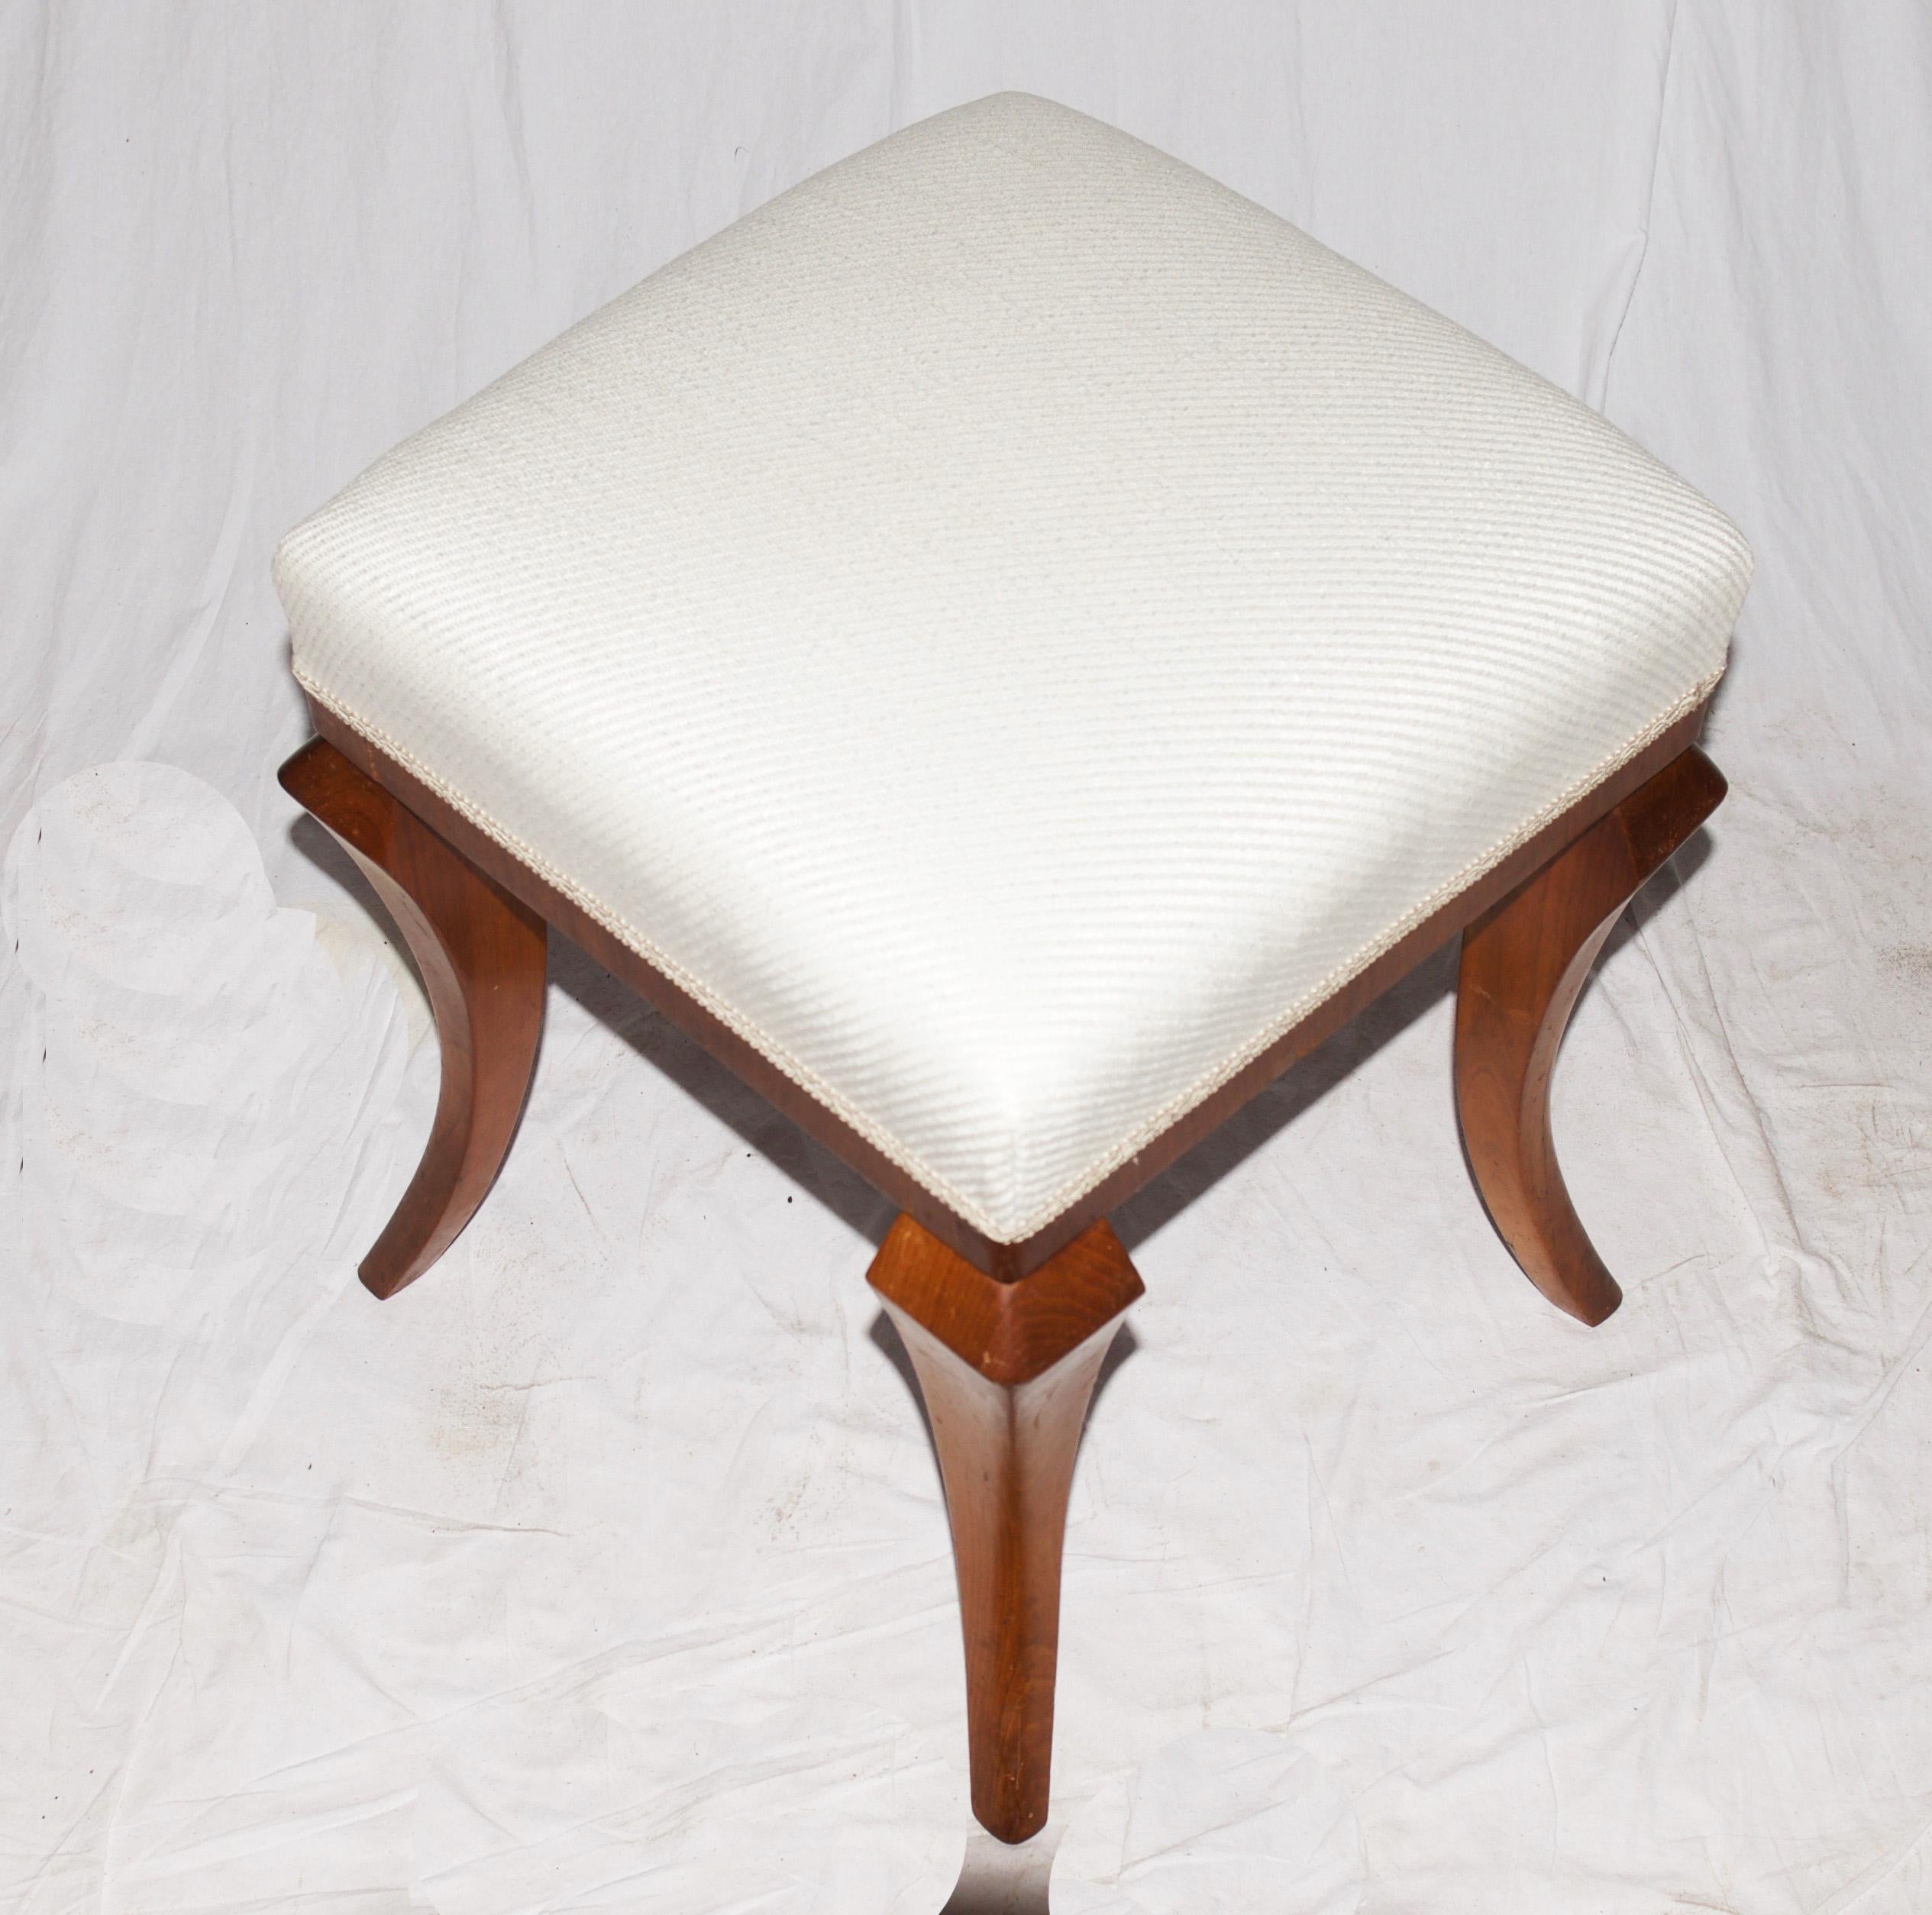 Art Deco Stool Ottoman, Footstool In Excellent Condition For Sale In Vienna, AT